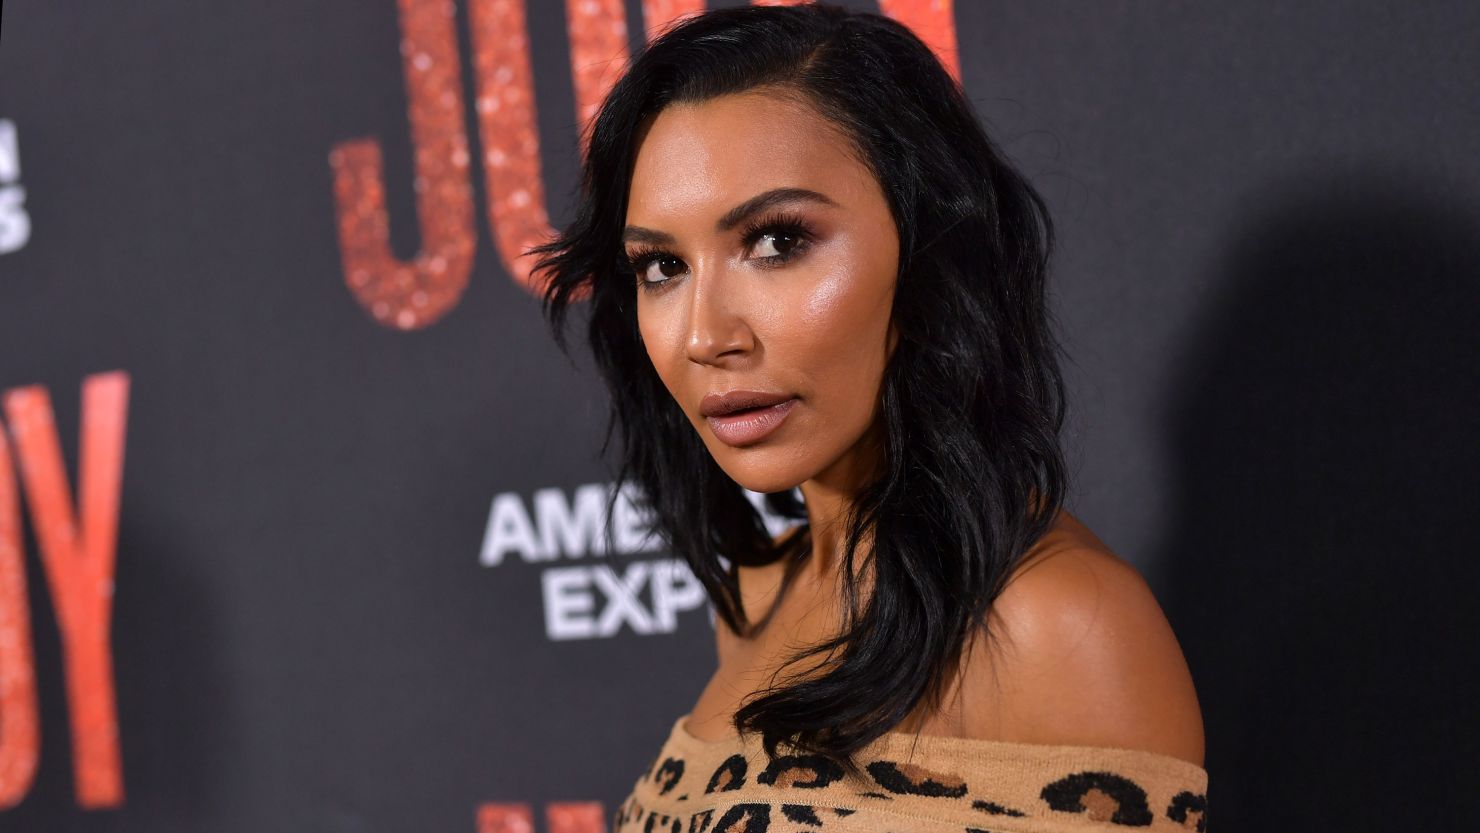 Naya Rivera's body was recovered from Lake Piru in Ventura County, California days after she went missing during a boating trip with her son.